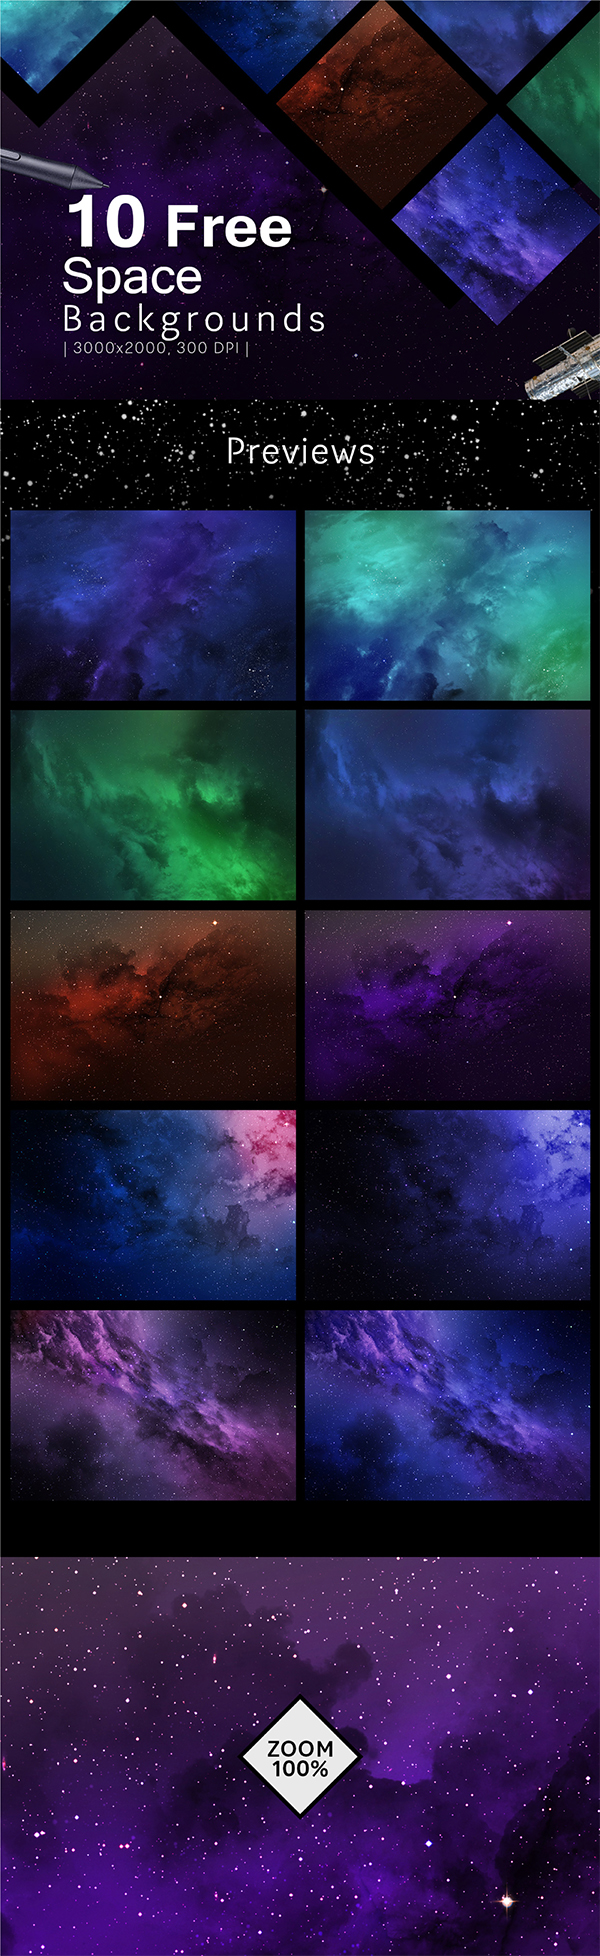 10 Free Space Backgrounds